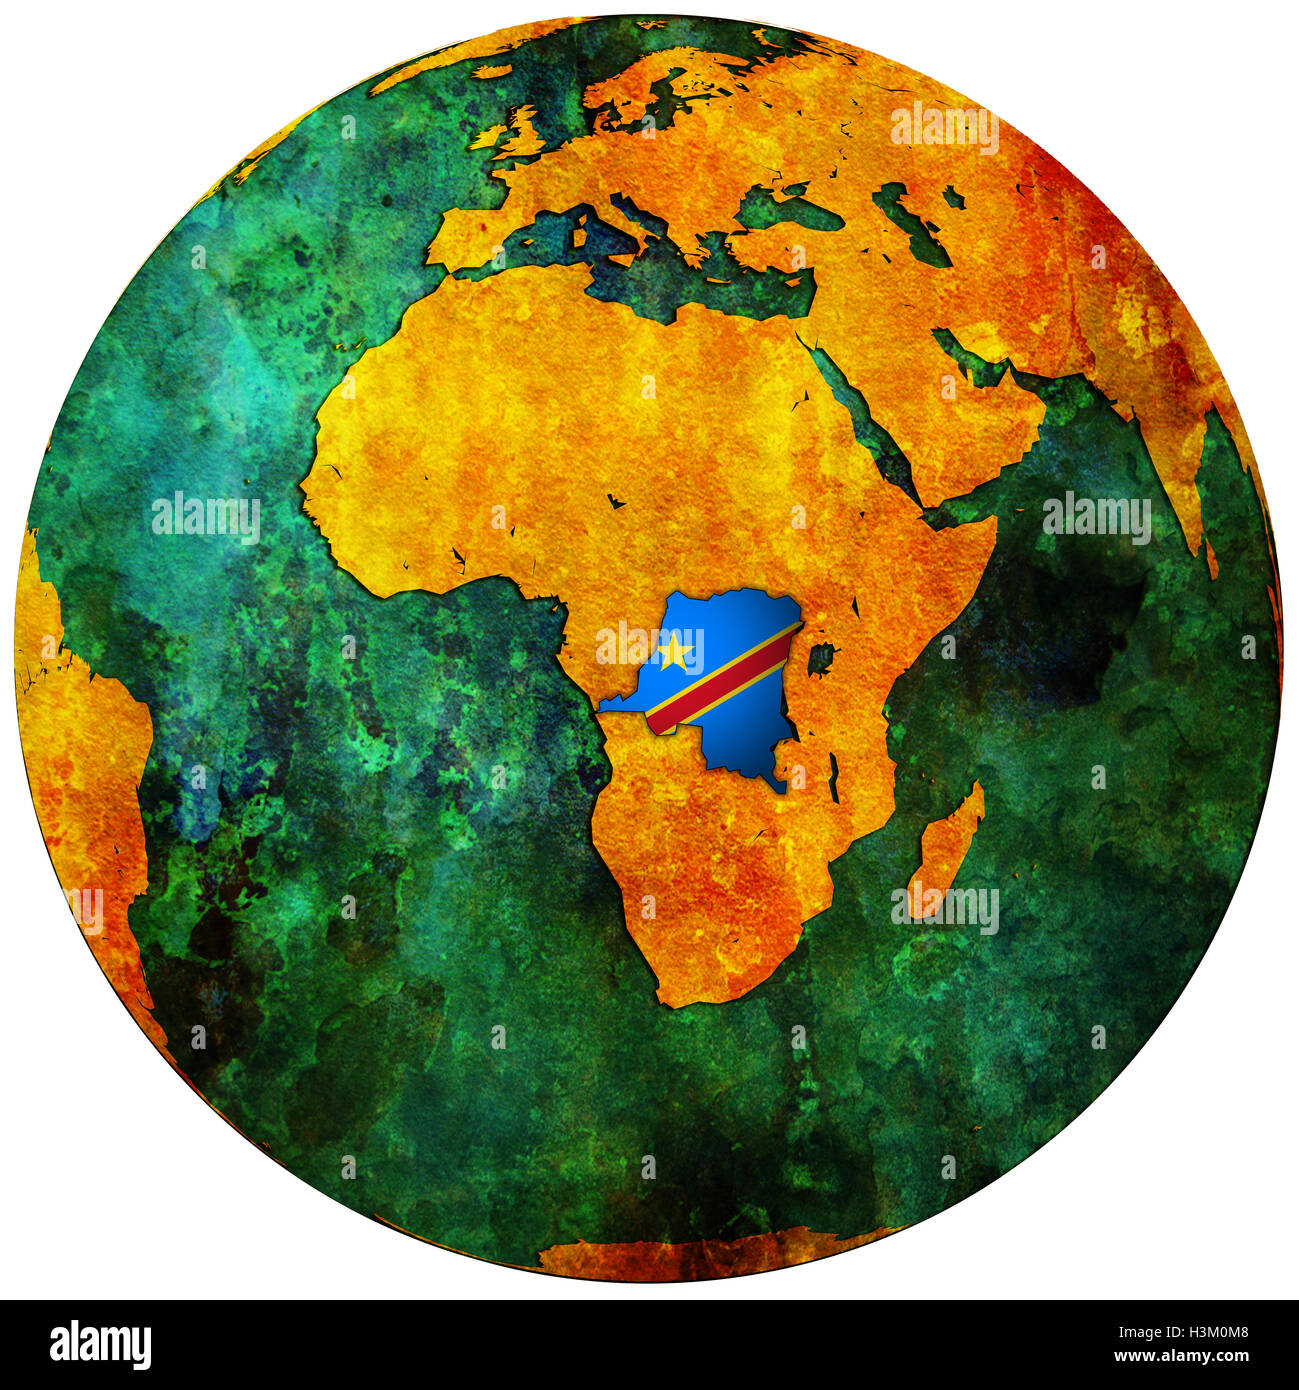 congo territory with flag on map of globe Stock Photo